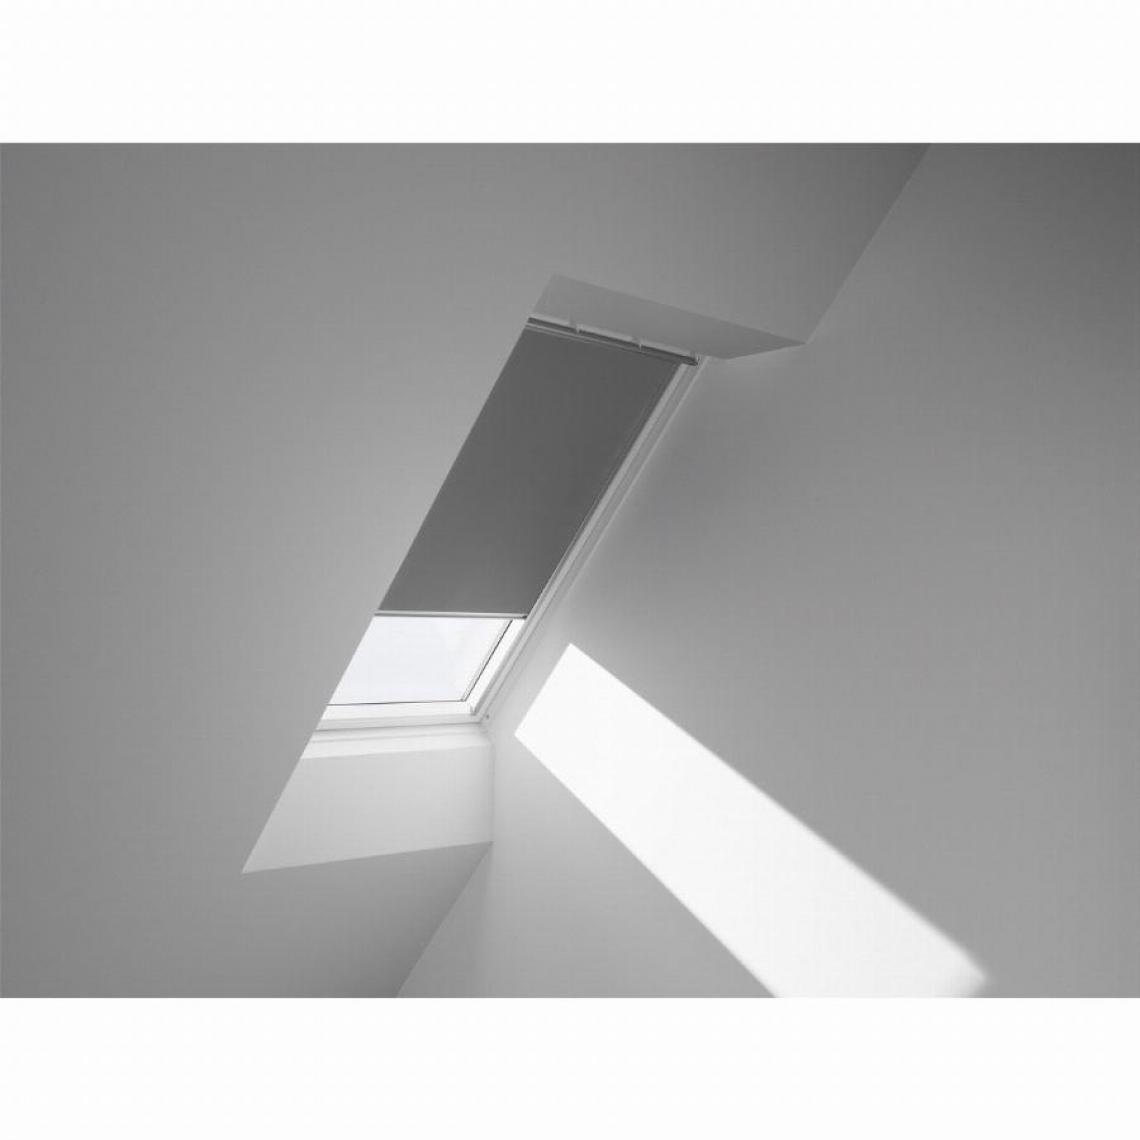 Velux France - Store occultant VELUX - Gris - DKL CK04 0705S - Store compatible Velux